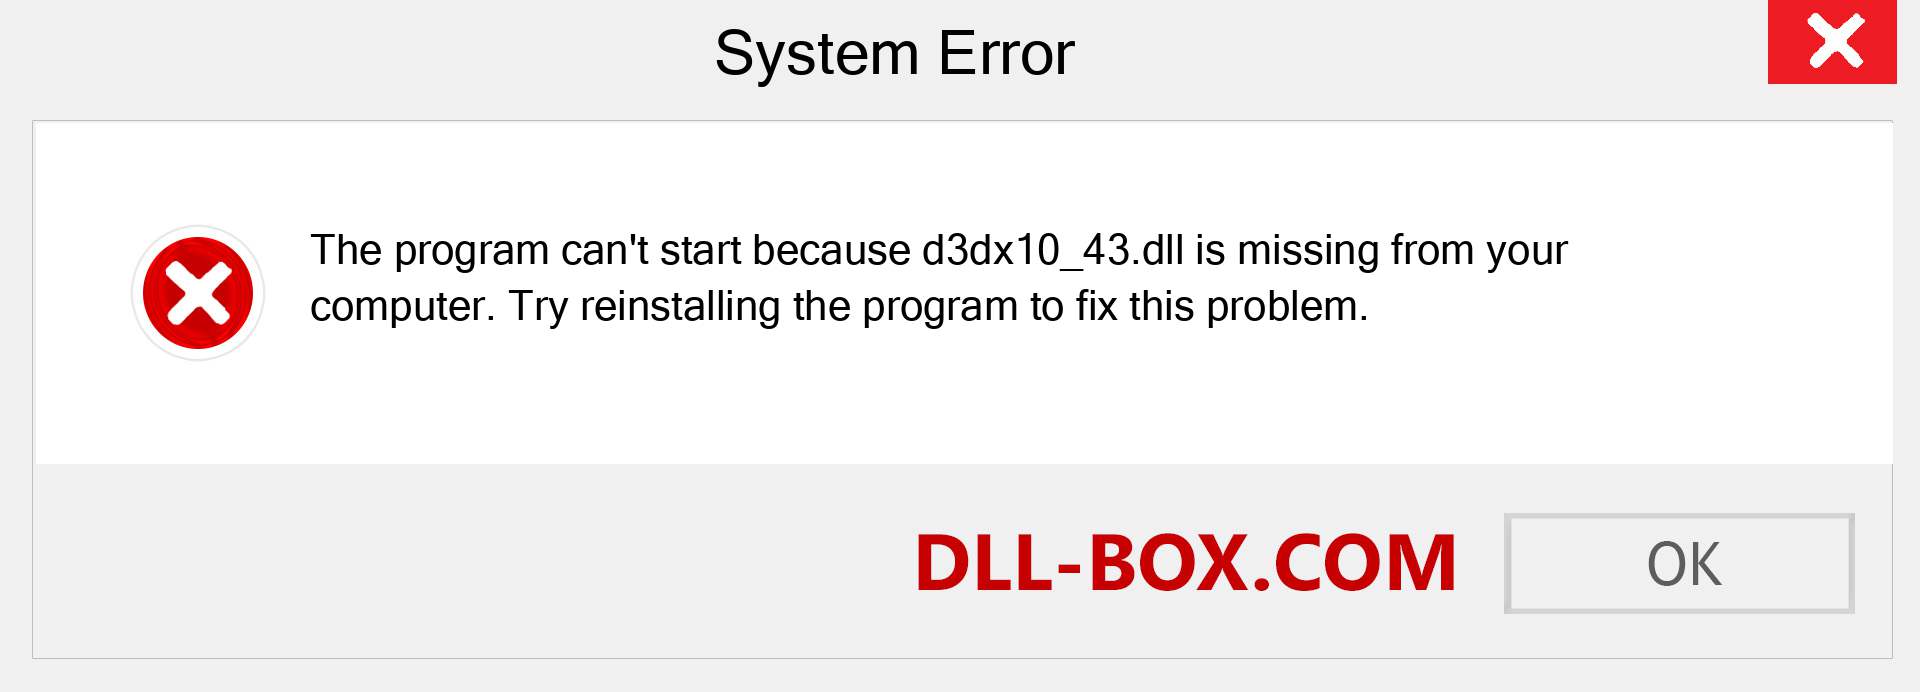  d3dx10_43.dll file is missing?. Download for Windows 7, 8, 10 - Fix  d3dx10_43 dll Missing Error on Windows, photos, images